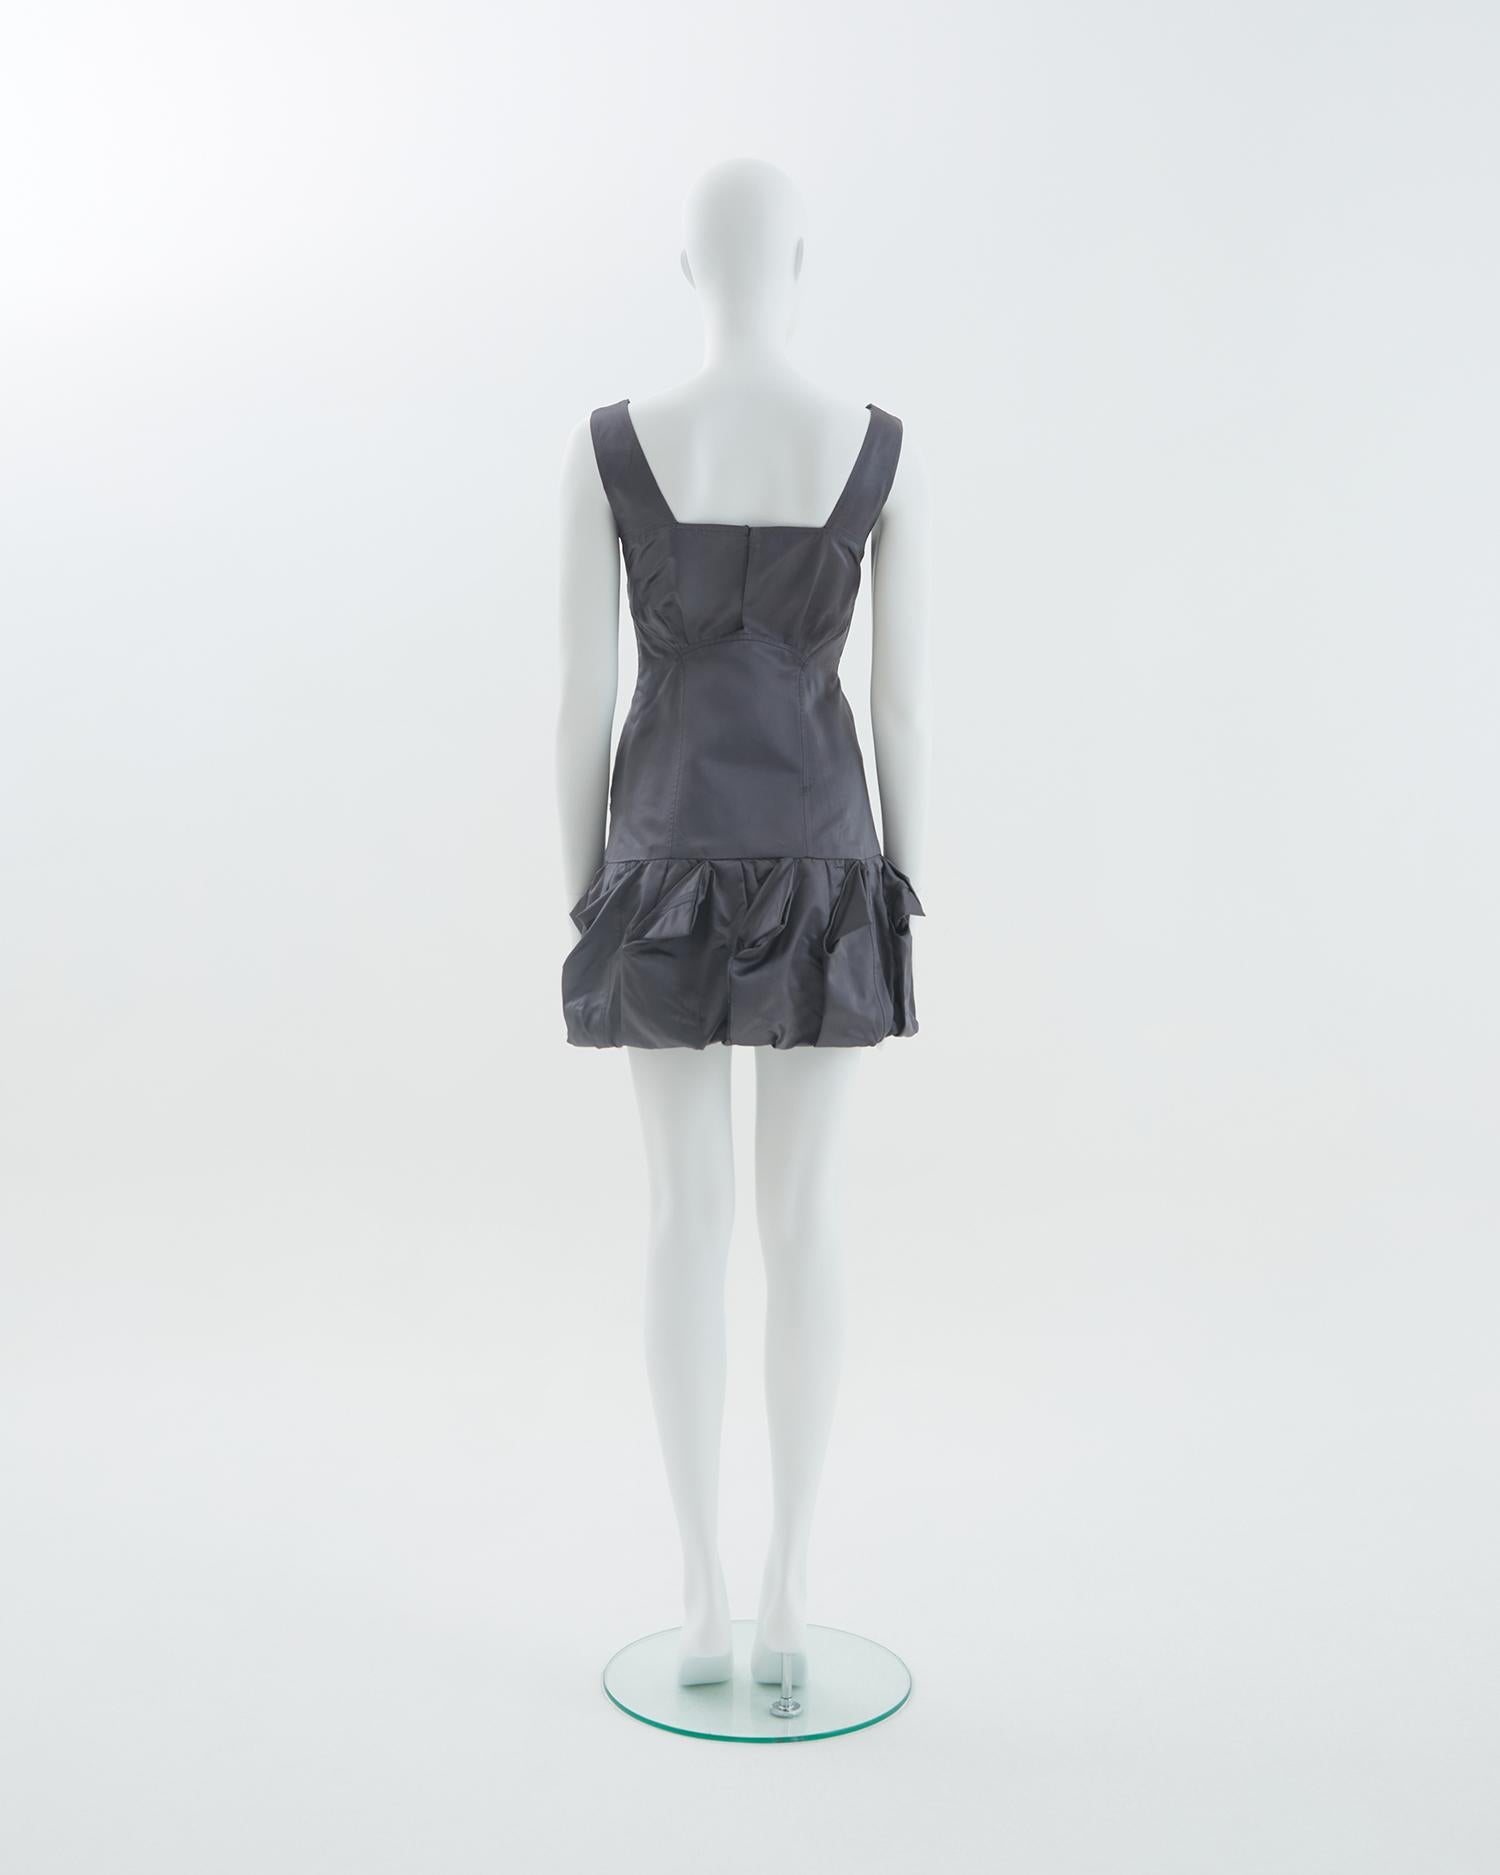 Prada S/S 2007 Gray silky cocktail dress In Excellent Condition For Sale In Milano, IT